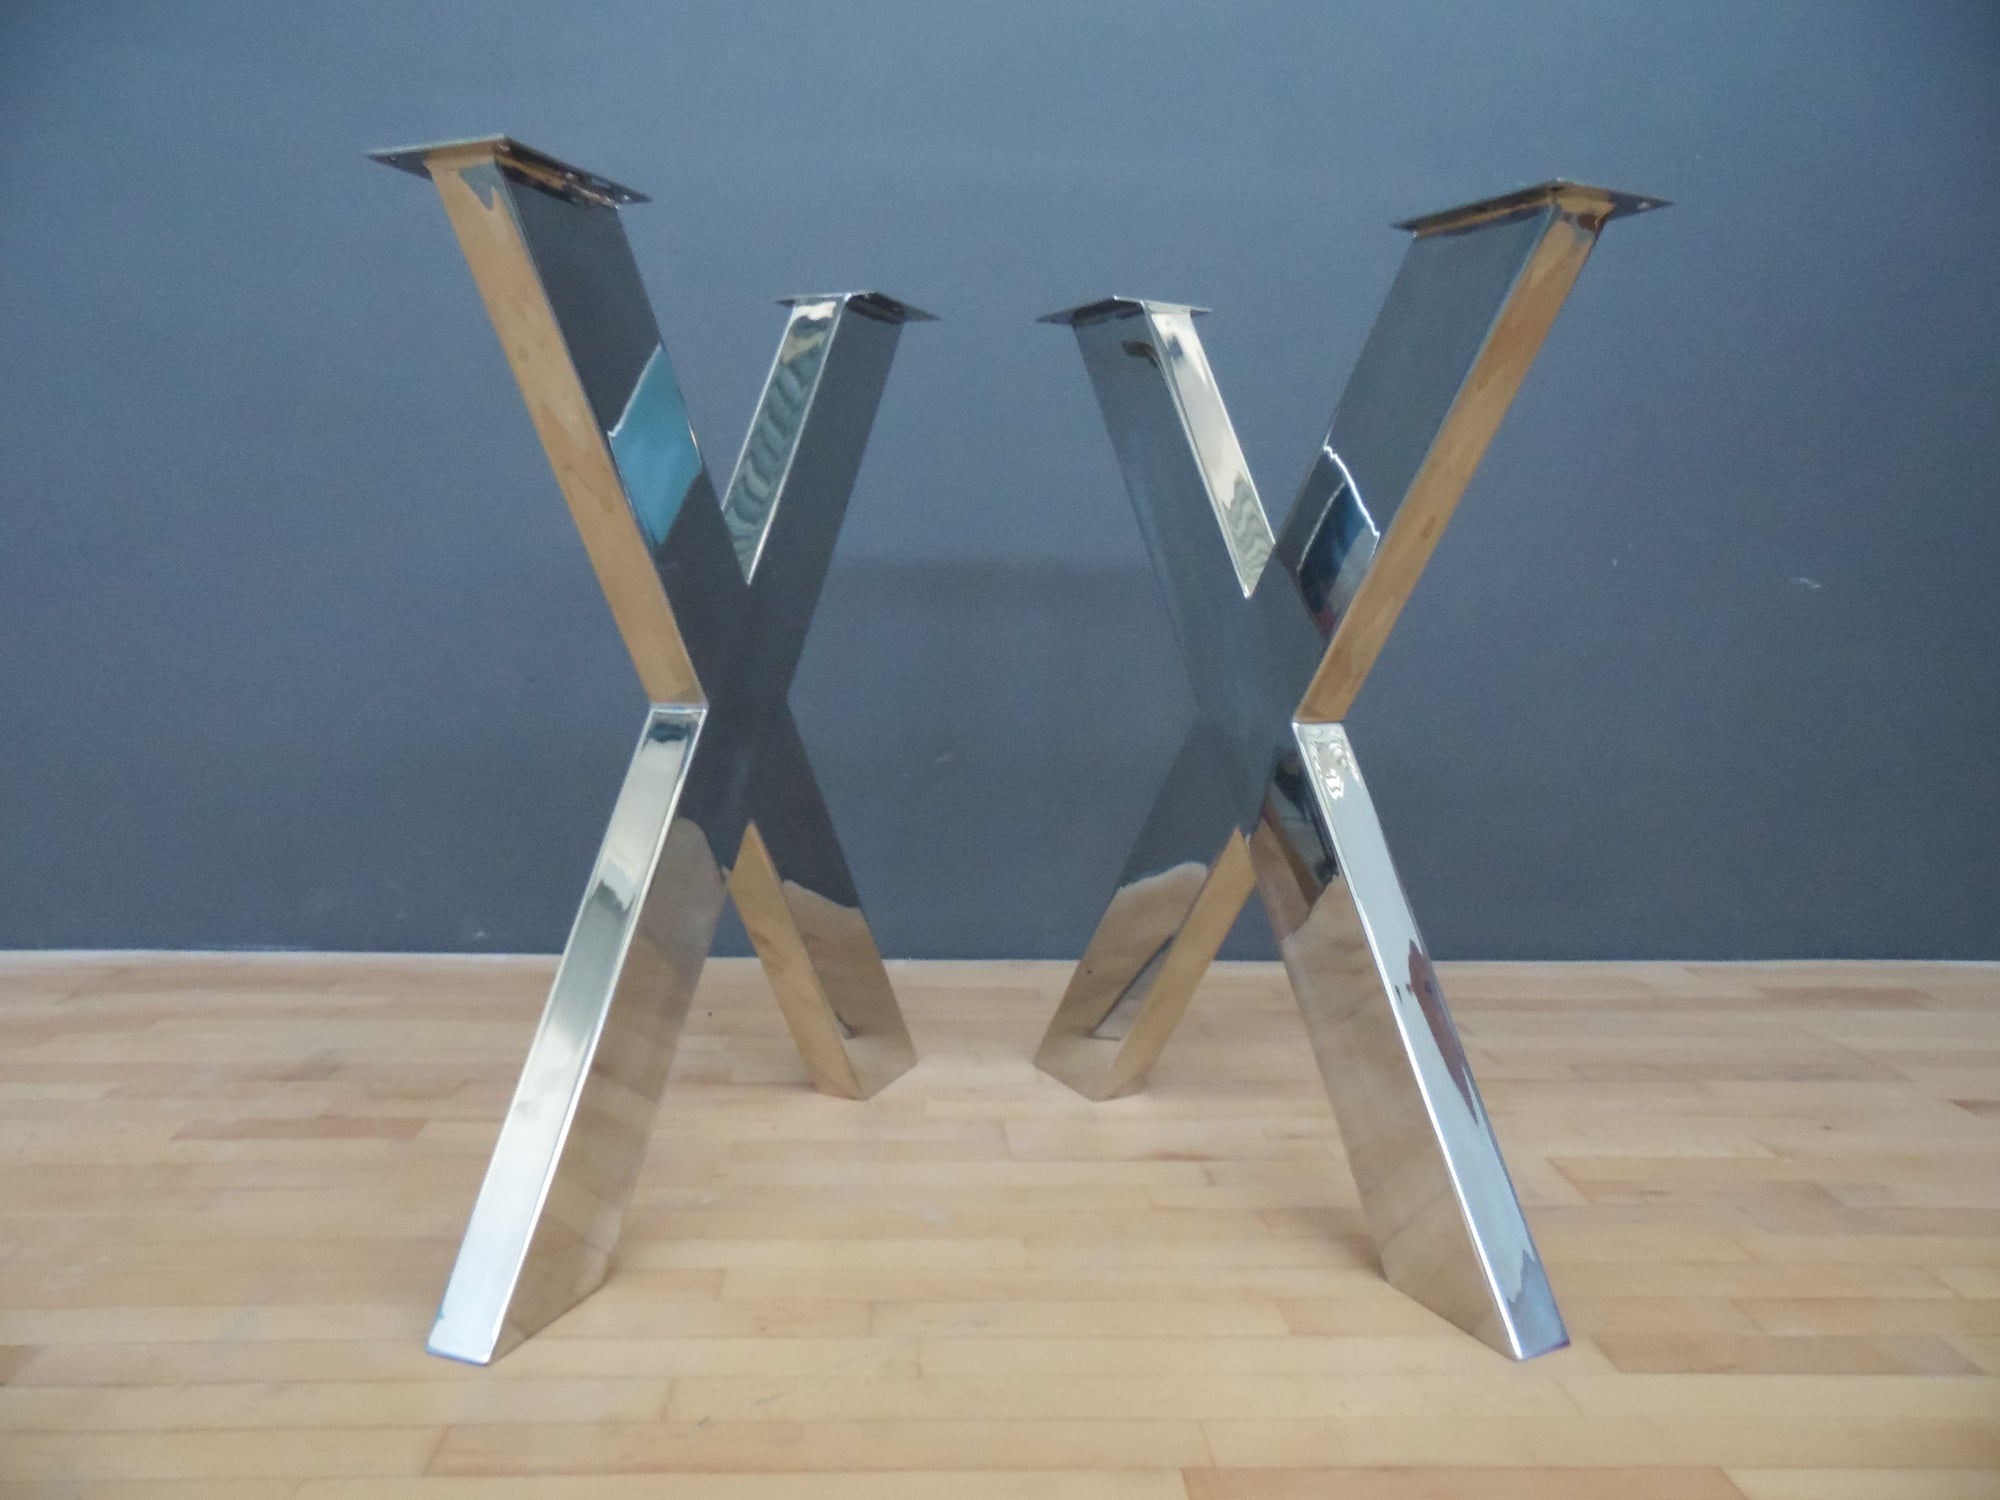 28" X Frame Table Legs, 24" Base Width, Stainless Steel Wide Tube, Height 26" 32" Set(2)